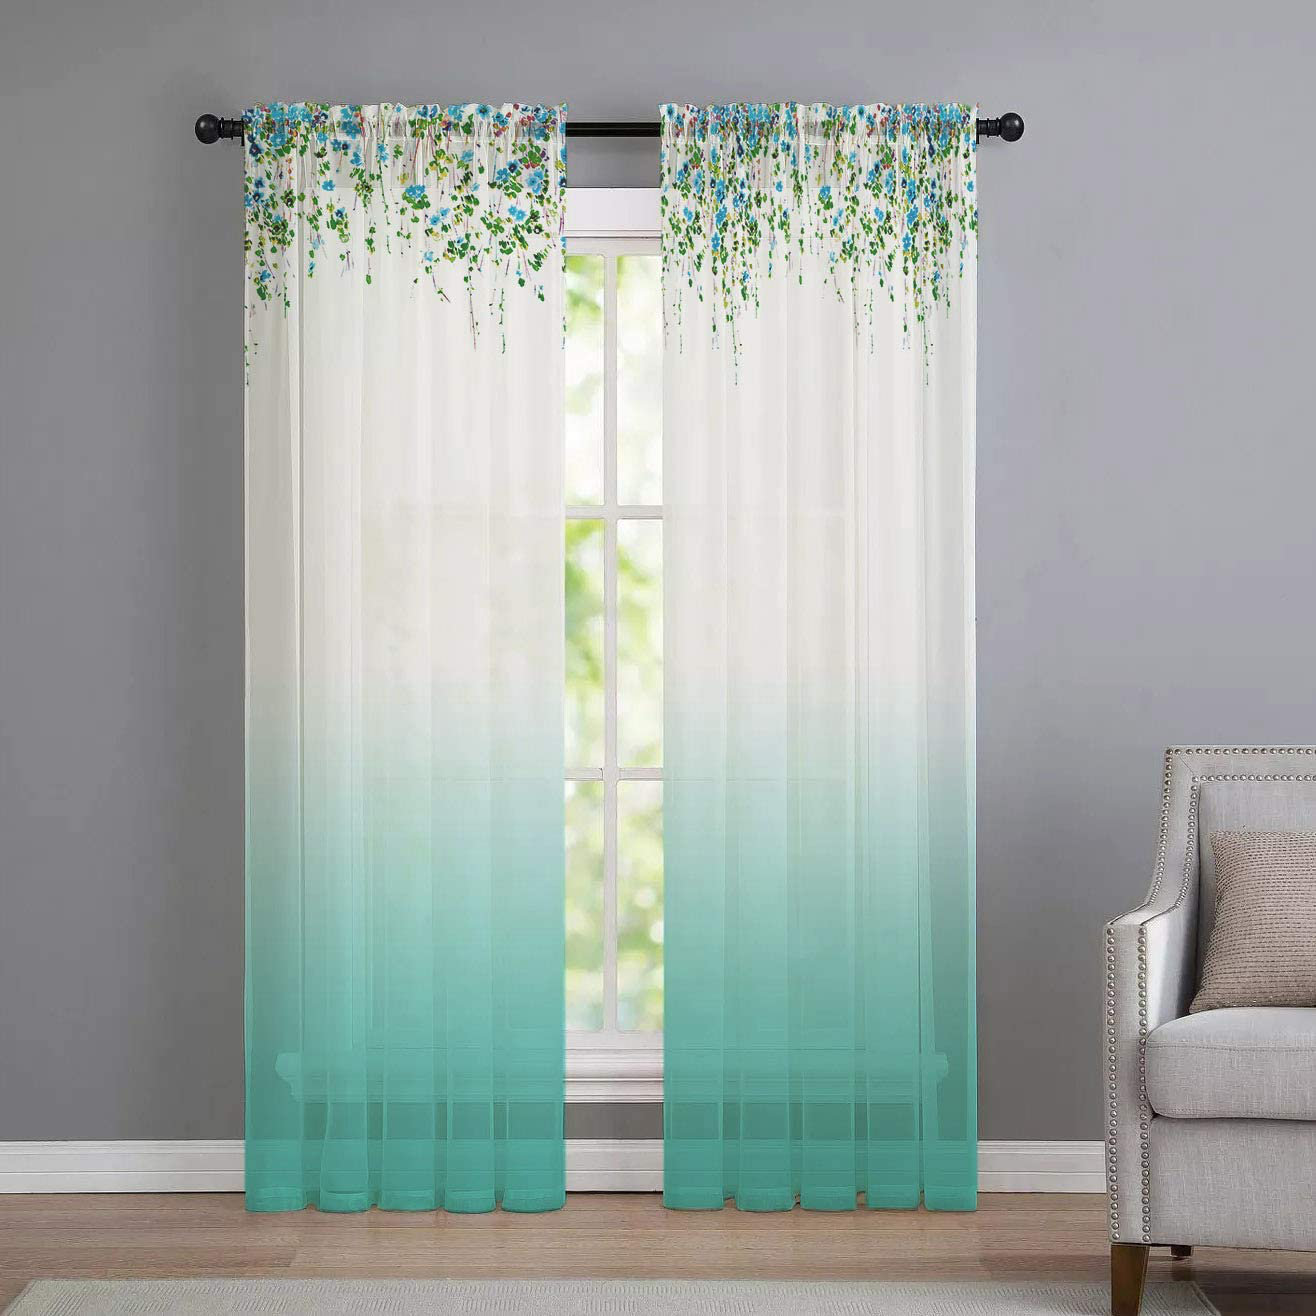 Lilac and Turquoise Curtains for Bedroom Girls Room Decor Set of 2 Panels Ombre 